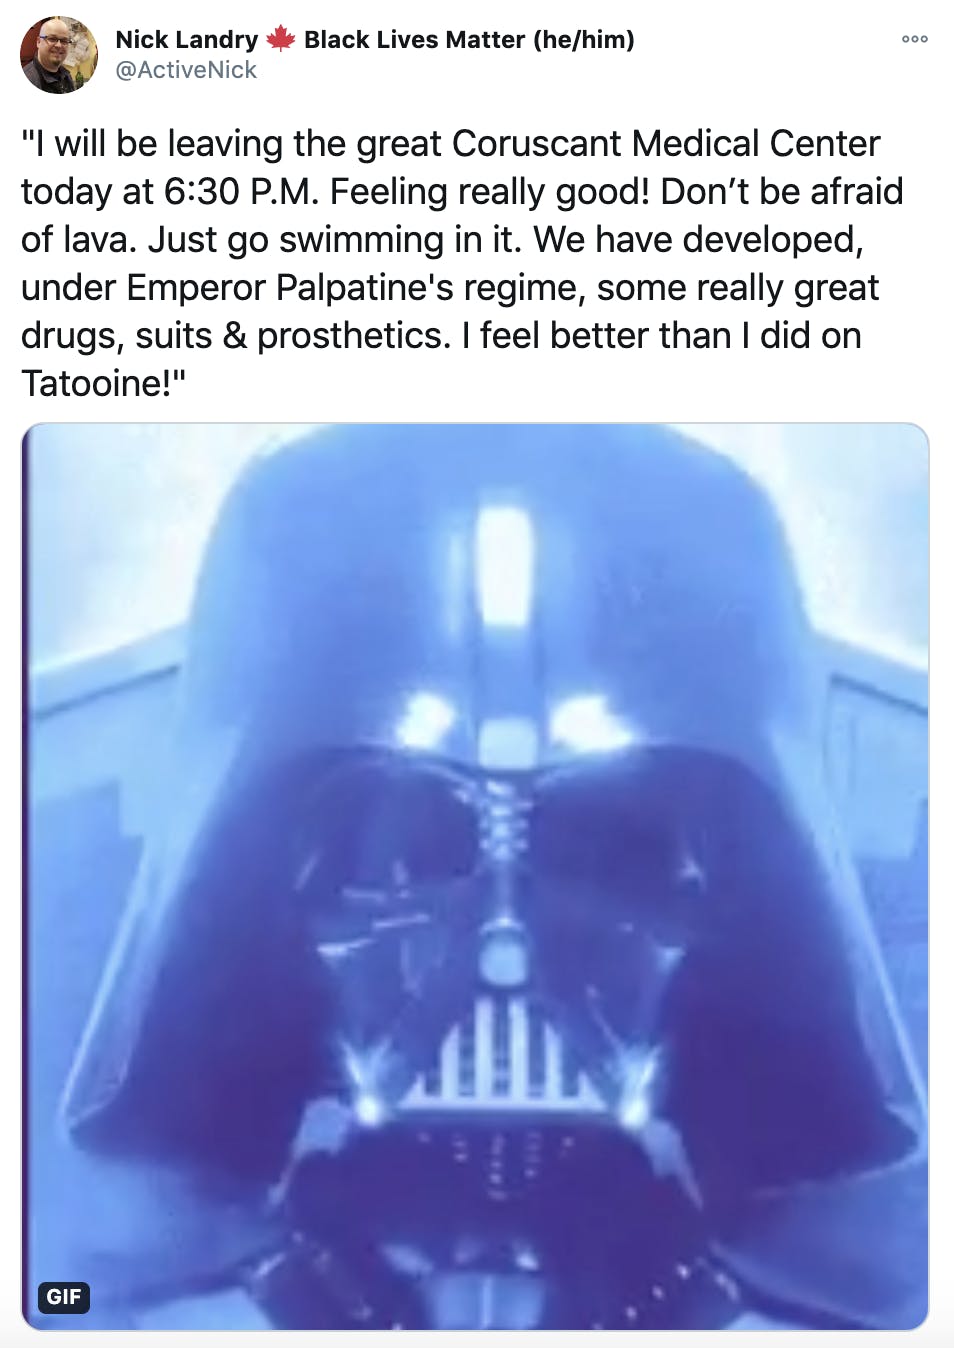 ""I will be leaving the great Coruscant Medical Center today at 6:30 P.M. Feeling really good! Don’t be afraid of lava. Just go swimming in it. We have developed, under Emperor Palpatine's regime, some really great drugs, suits & prosthetics. I feel better than I did on Tatooine!"" gif of Darth Vader emerging in his suit for the first time